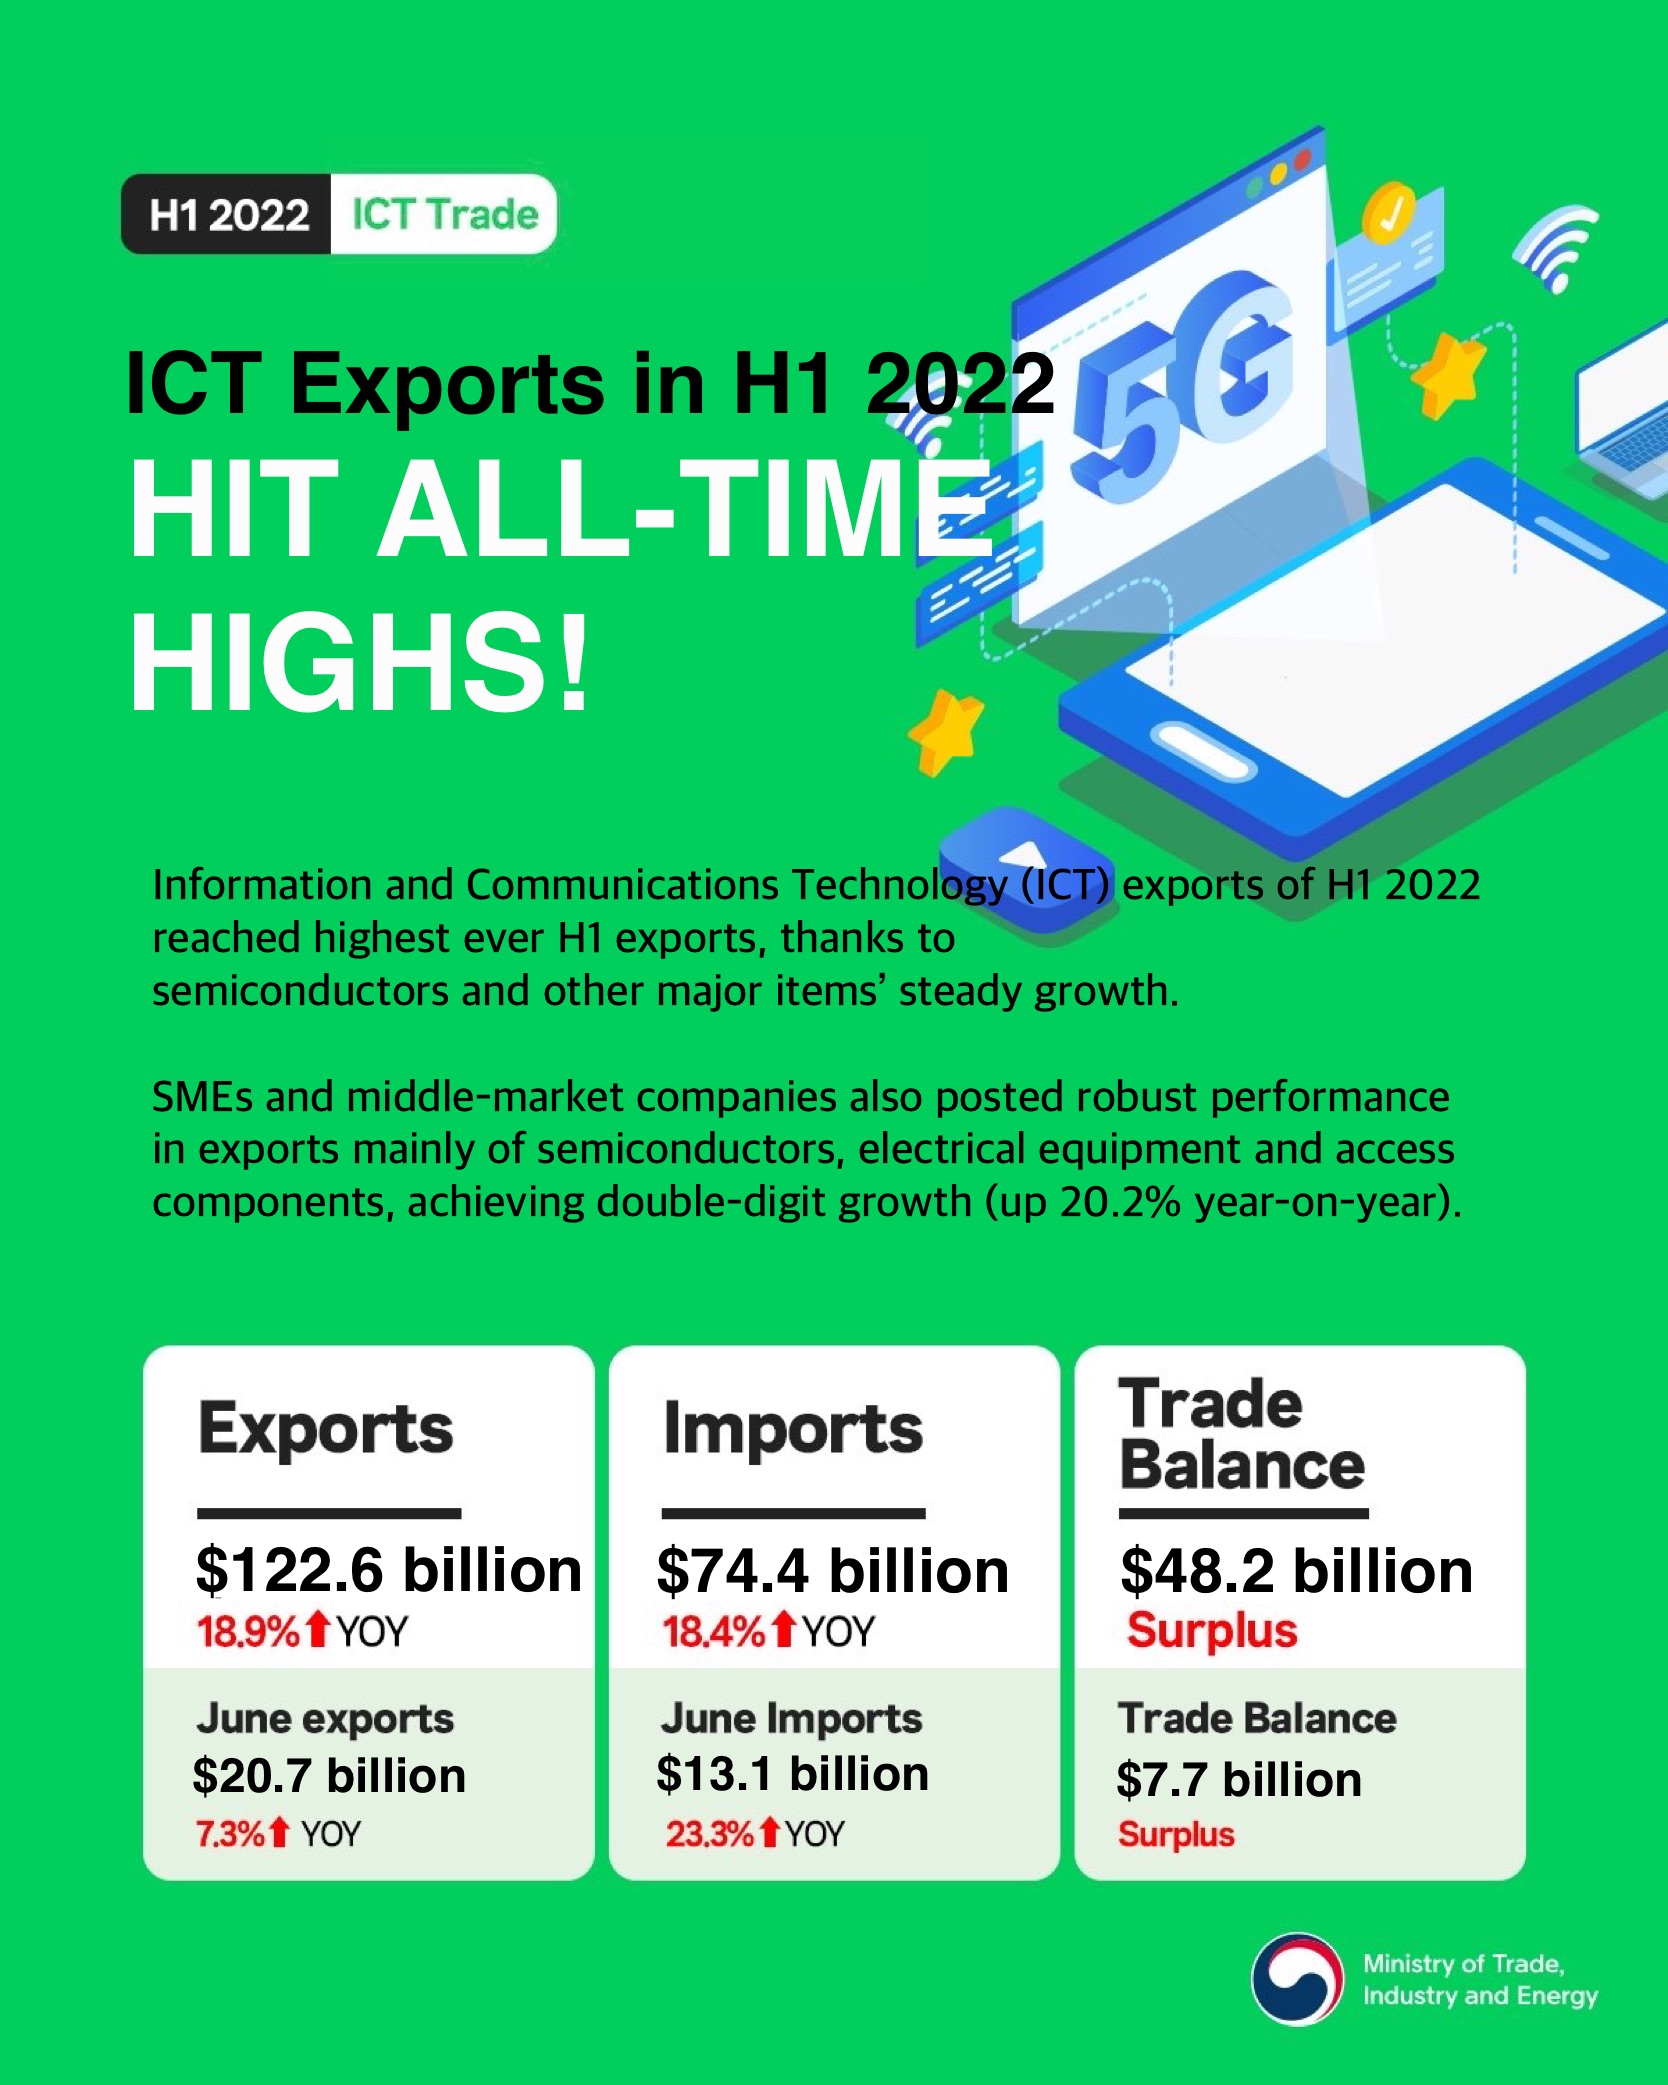 Korea's ICT exports hit all-time highs for both June and H1 Image 0